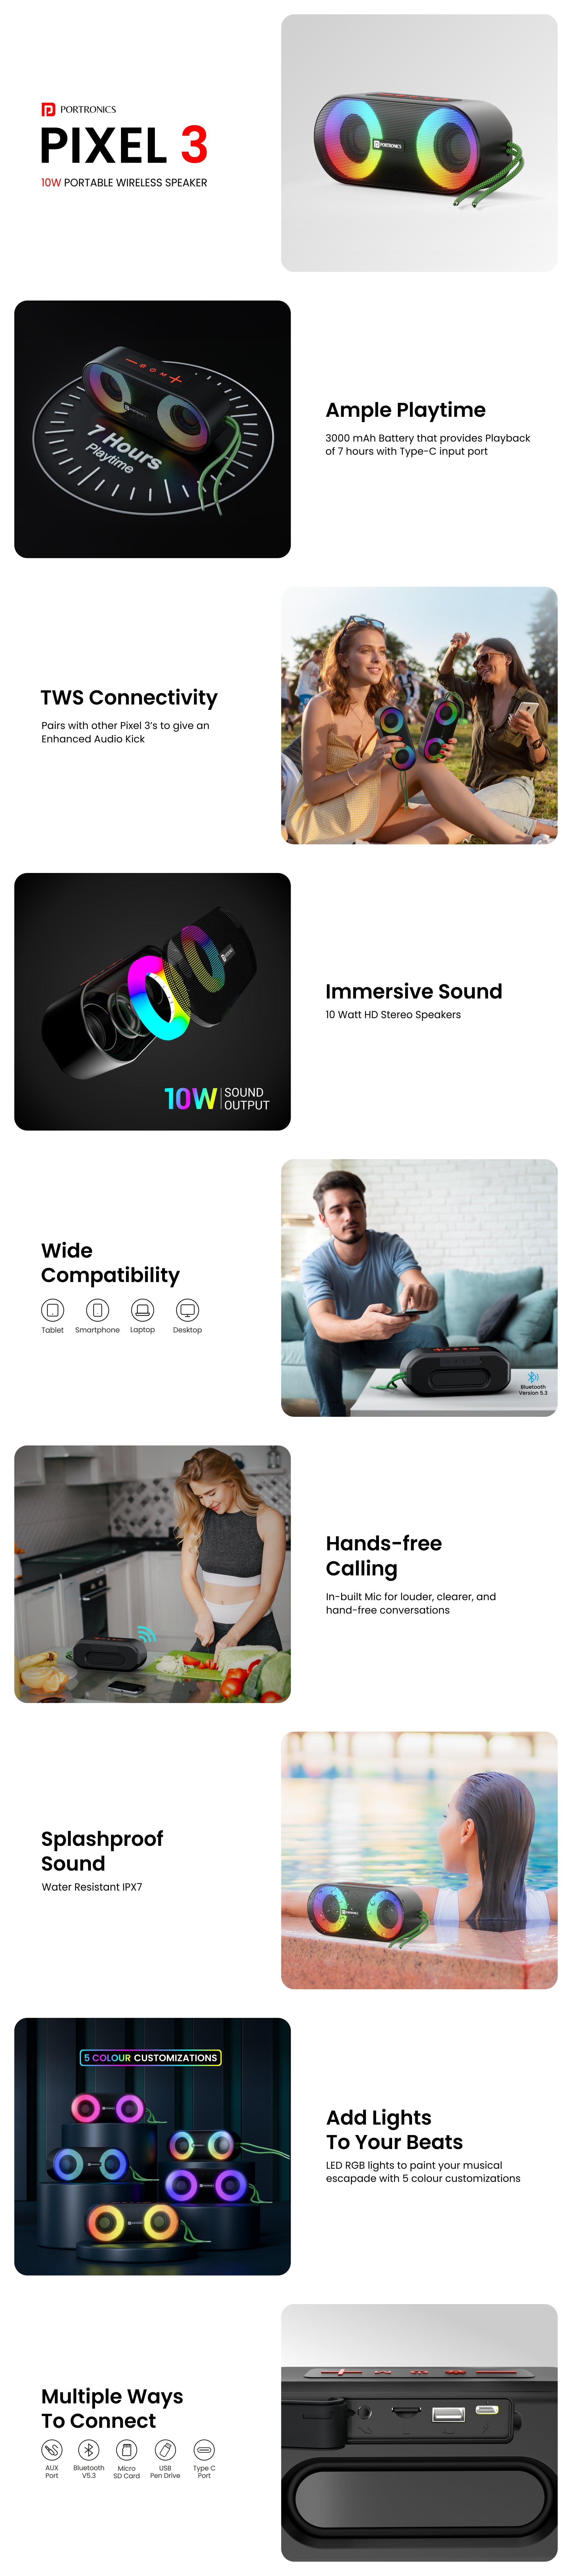 Portronics pixel 3 wireless bluetooth speakers with TWS connectivity